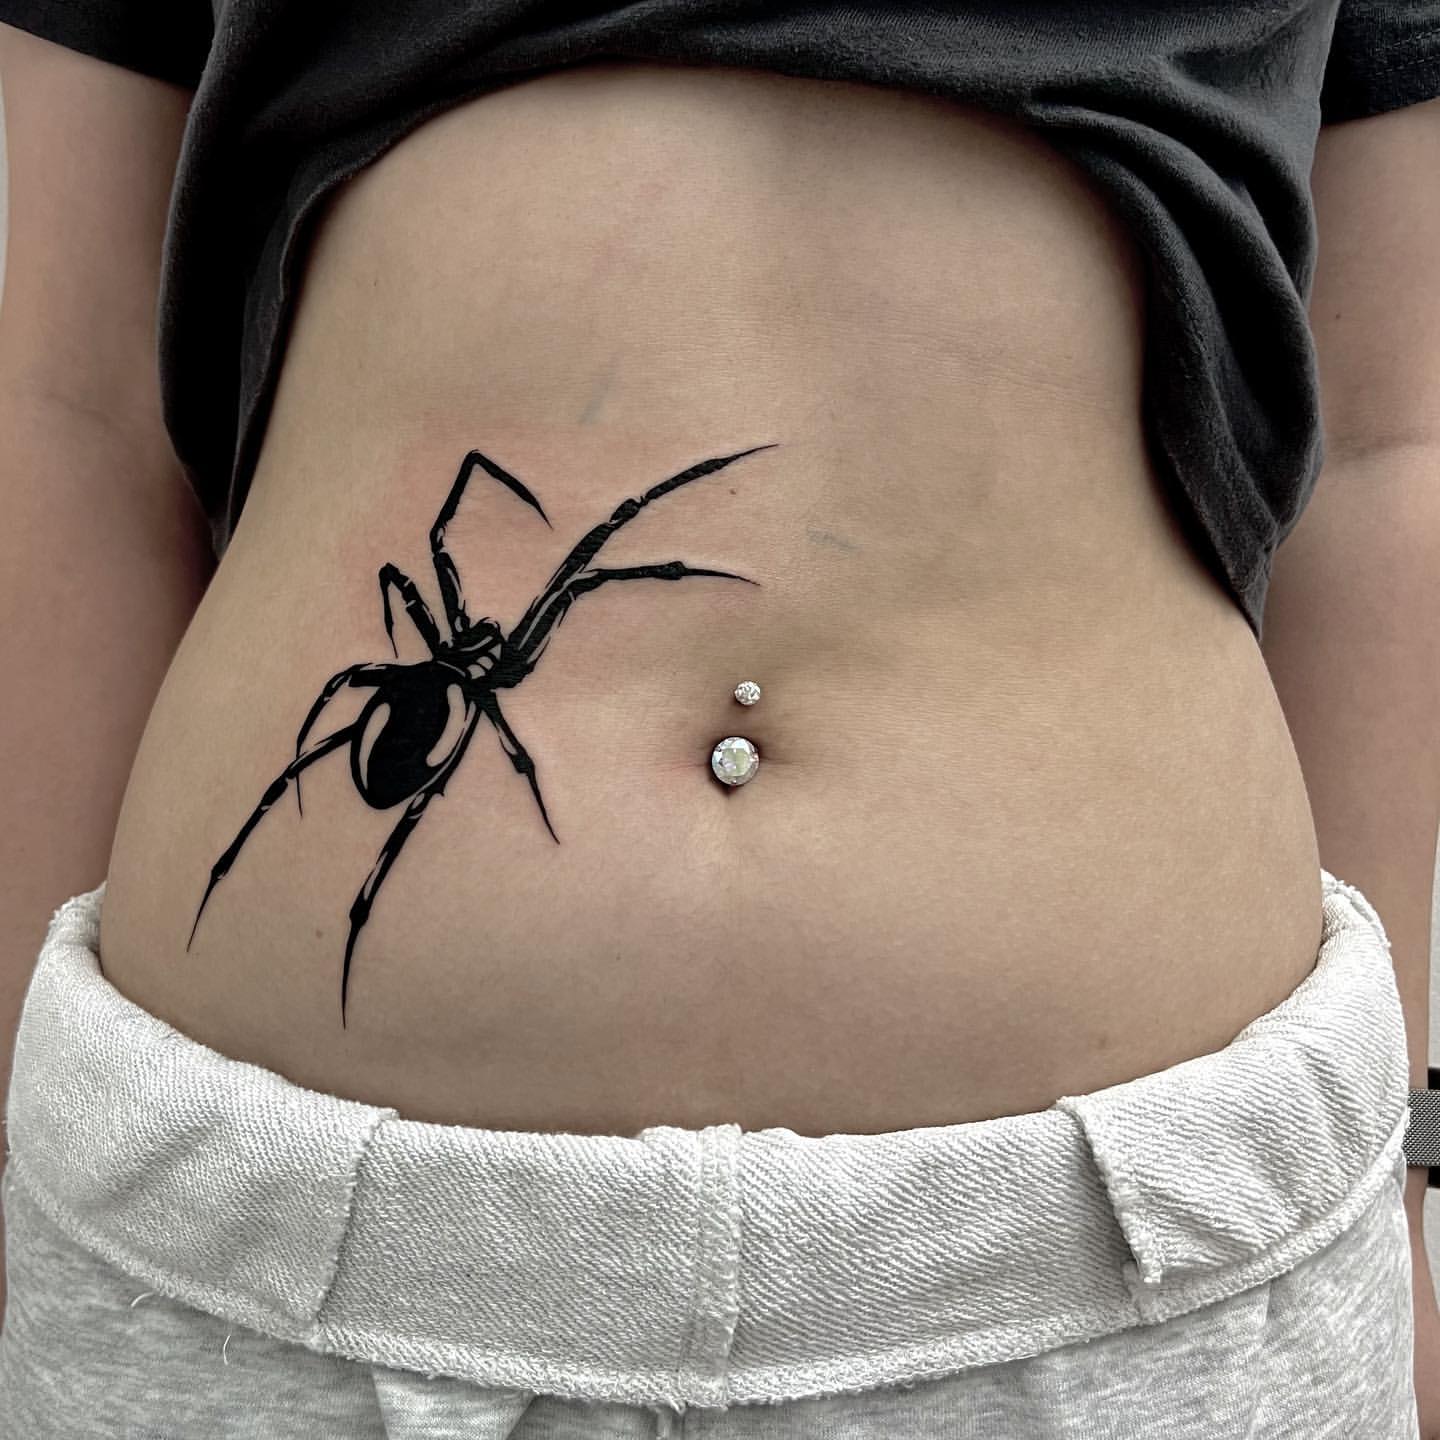 Details 99+ about basic spider tattoo latest .vn